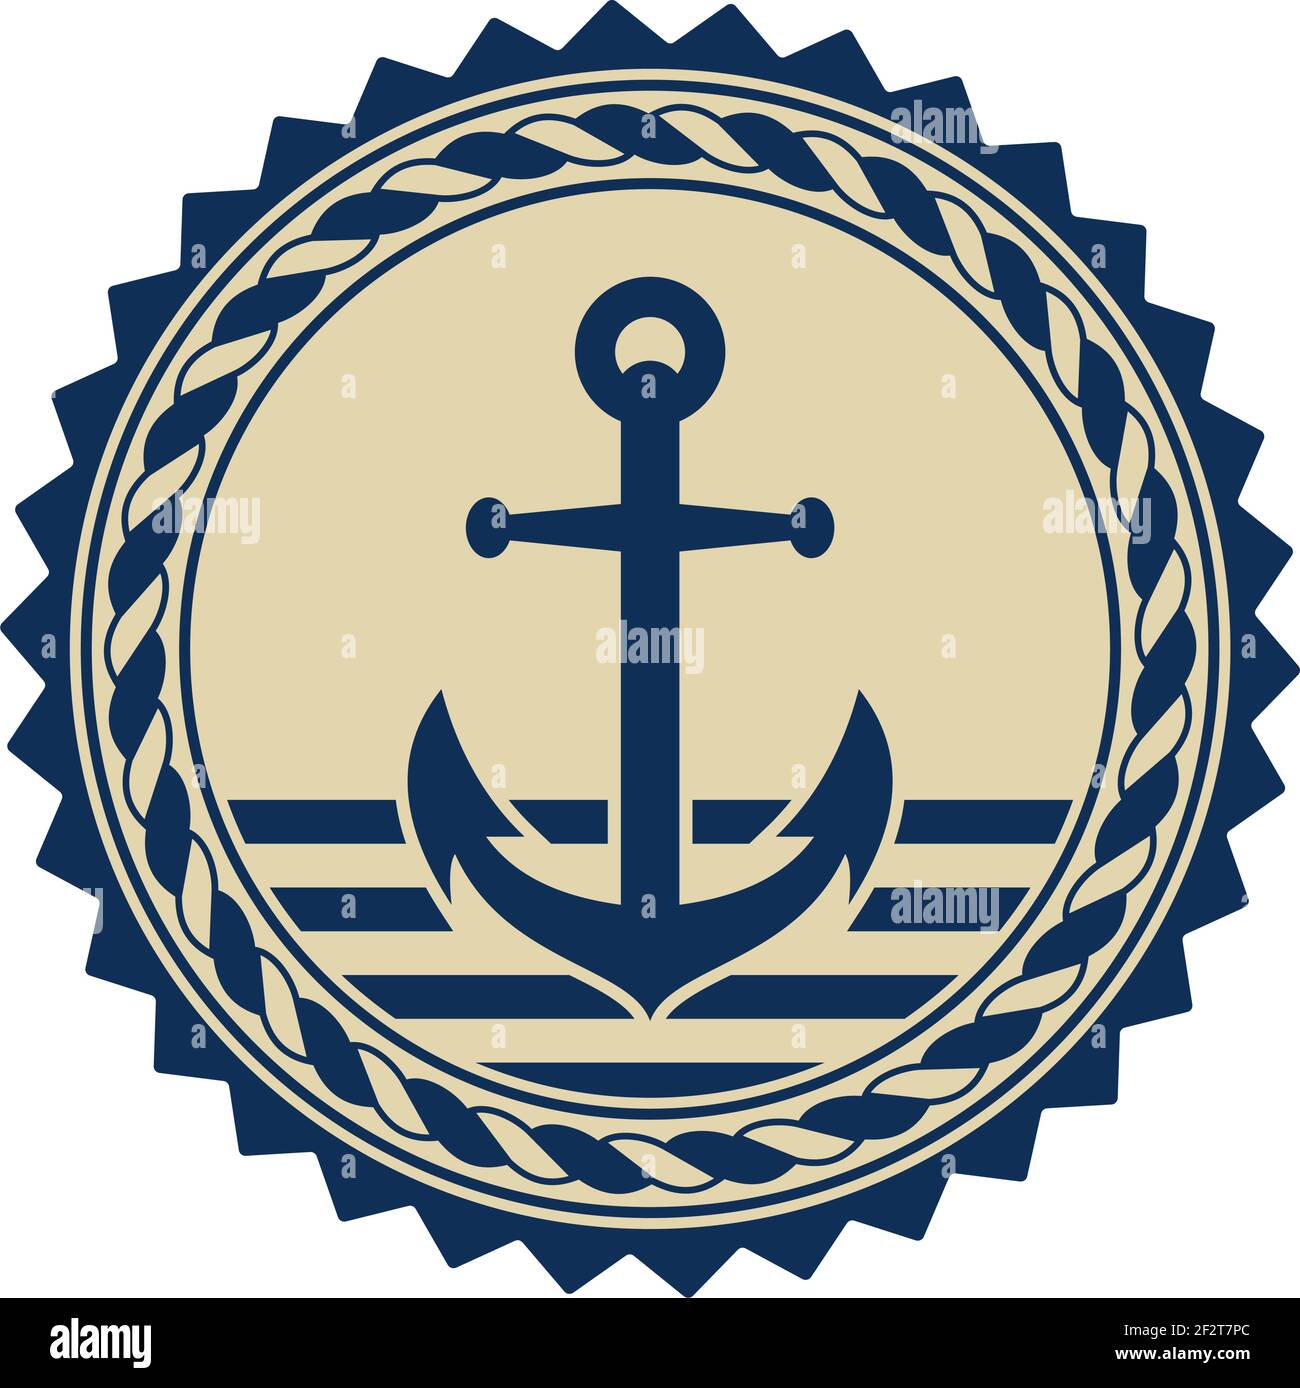 Blue Flat Anchor Logo Isolated On Stock Vector (Royalty Free